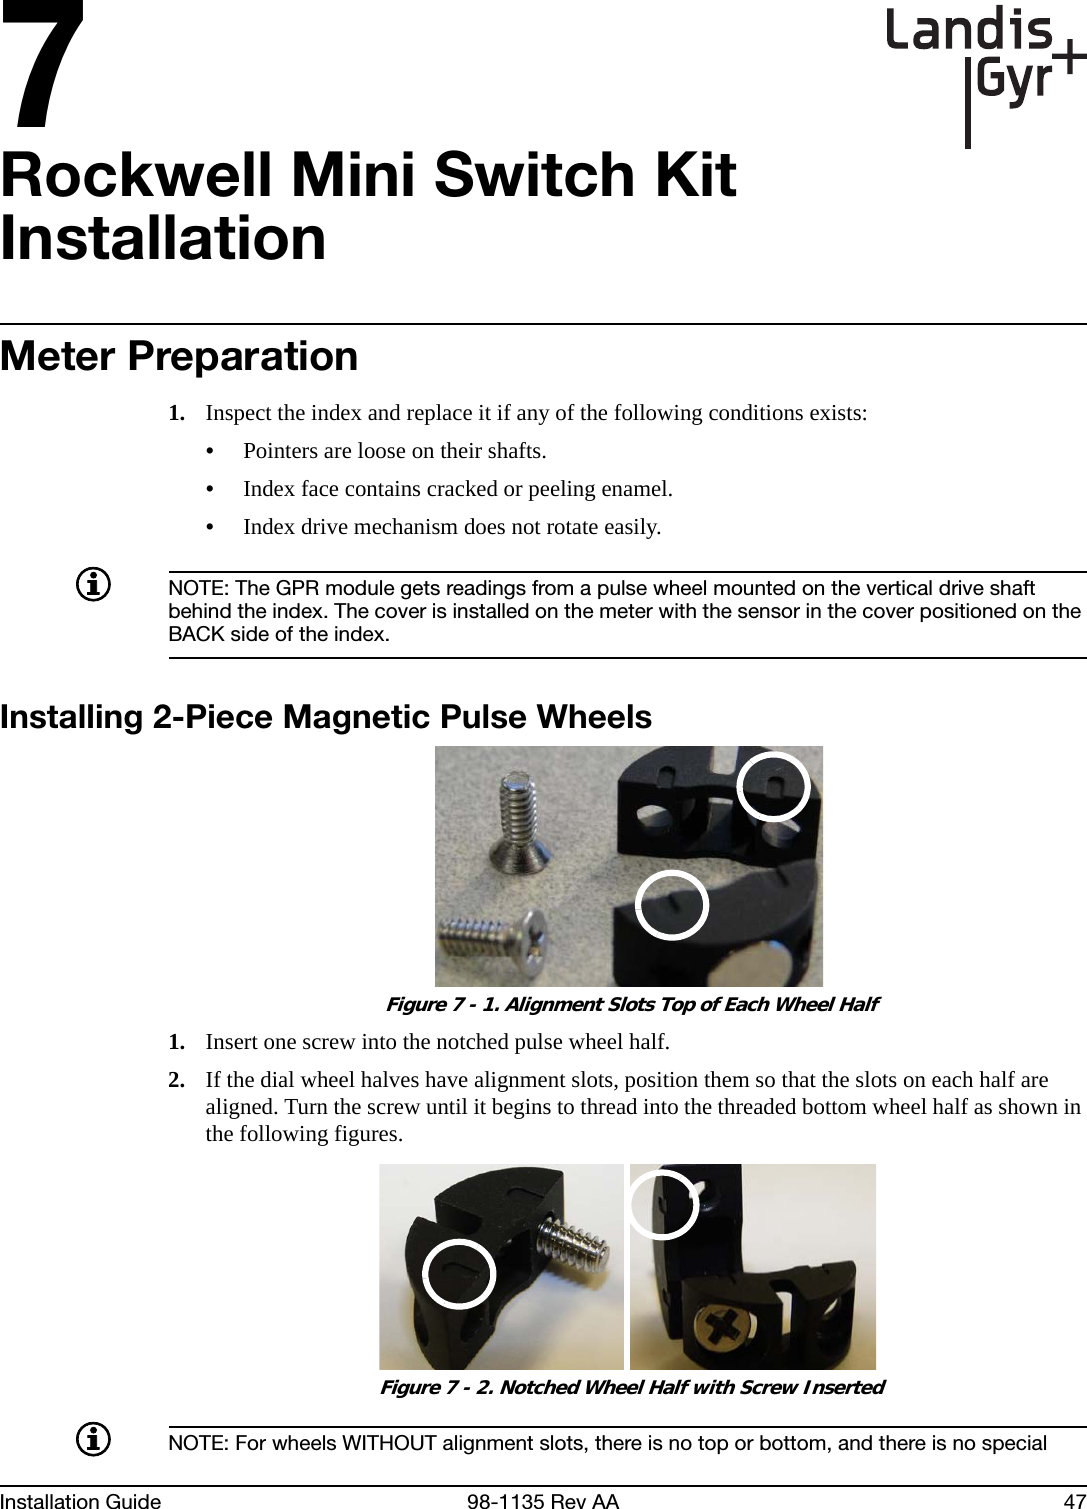 7Installation Guide 98-1135 Rev AA 47Rockwell Mini Switch Kit InstallationMeter Preparation1. Inspect the index and replace it if any of the following conditions exists:•Pointers are loose on their shafts.•Index face contains cracked or peeling enamel.•Index drive mechanism does not rotate easily.NOTE: The GPR module gets readings from a pulse wheel mounted on the vertical drive shaft behind the index. The cover is installed on the meter with the sensor in the cover positioned on the BACK side of the index.Installing 2-Piece Magnetic Pulse Wheels Figure 7 - 1. Alignment Slots Top of Each Wheel Half1. Insert one screw into the notched pulse wheel half.2. If the dial wheel halves have alignment slots, position them so that the slots on each half are aligned. Turn the screw until it begins to thread into the threaded bottom wheel half as shown in the following figures. Figure 7 - 2. Notched Wheel Half with Screw InsertedNOTE: For wheels WITHOUT alignment slots, there is no top or bottom, and there is no special 